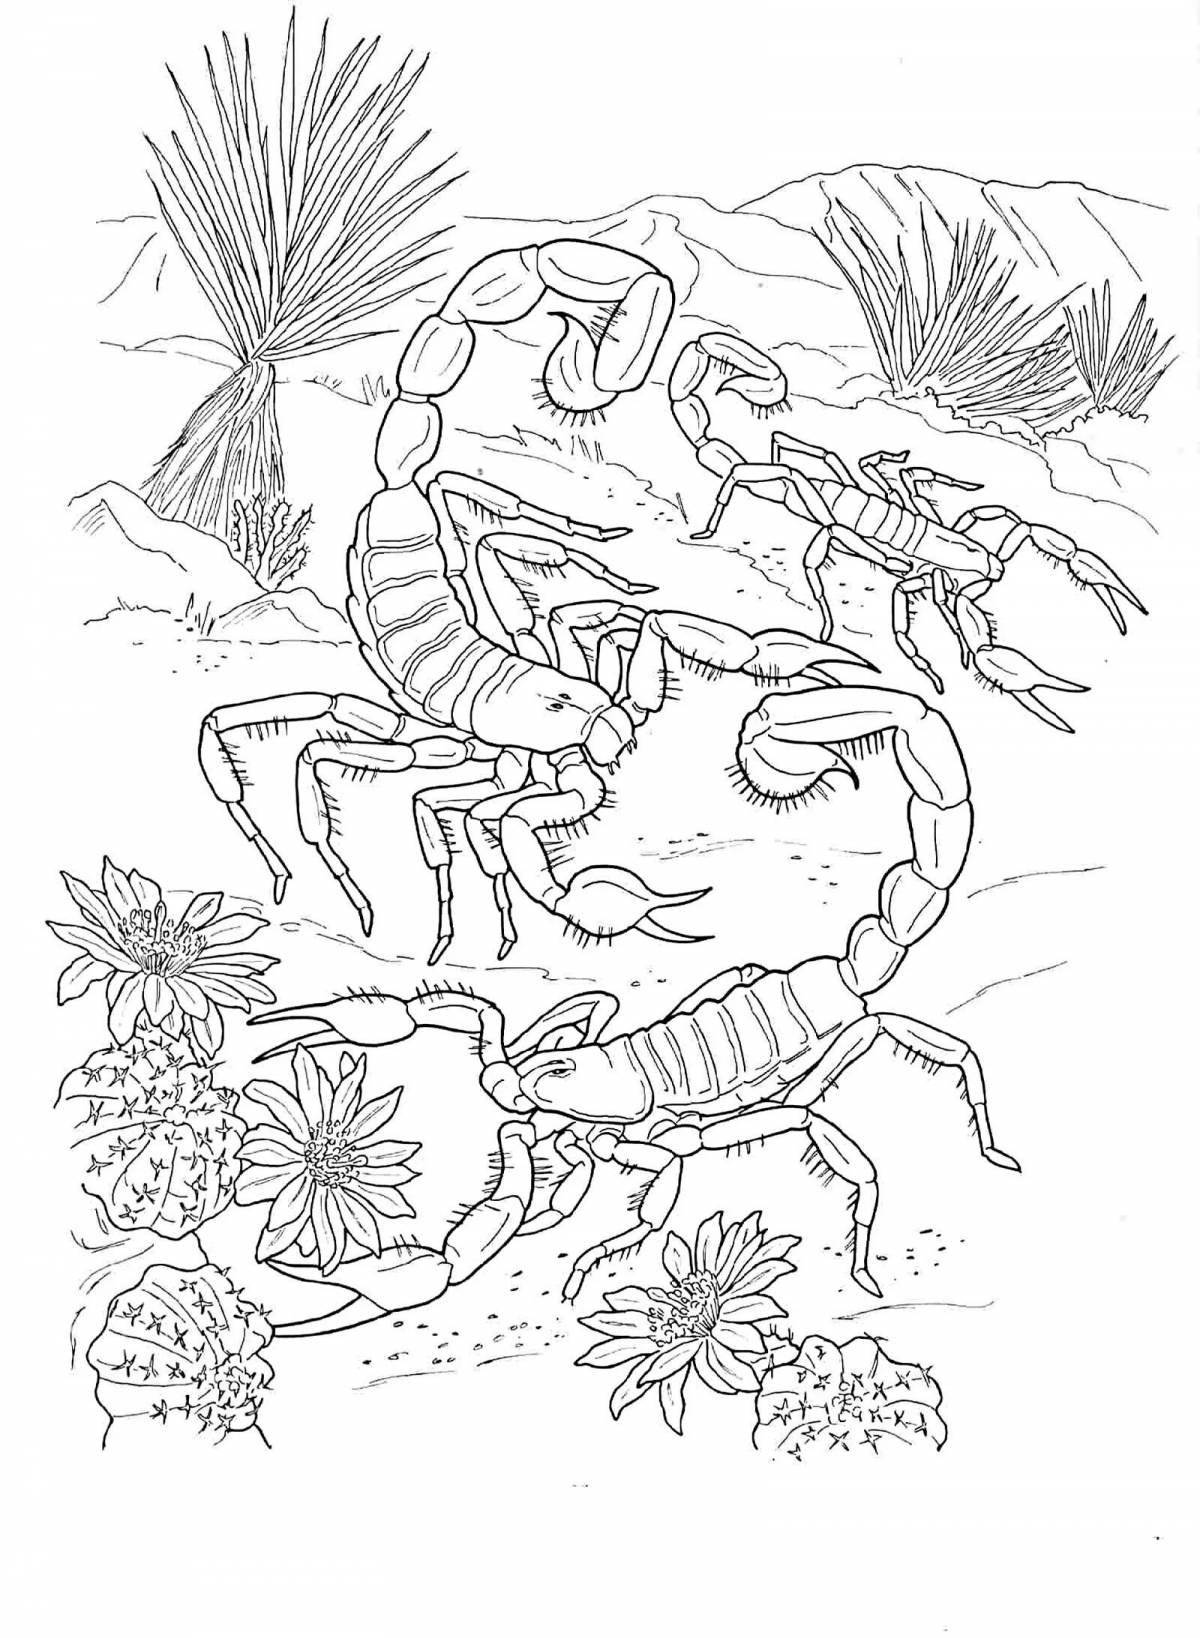 Coloring page charming scorpion